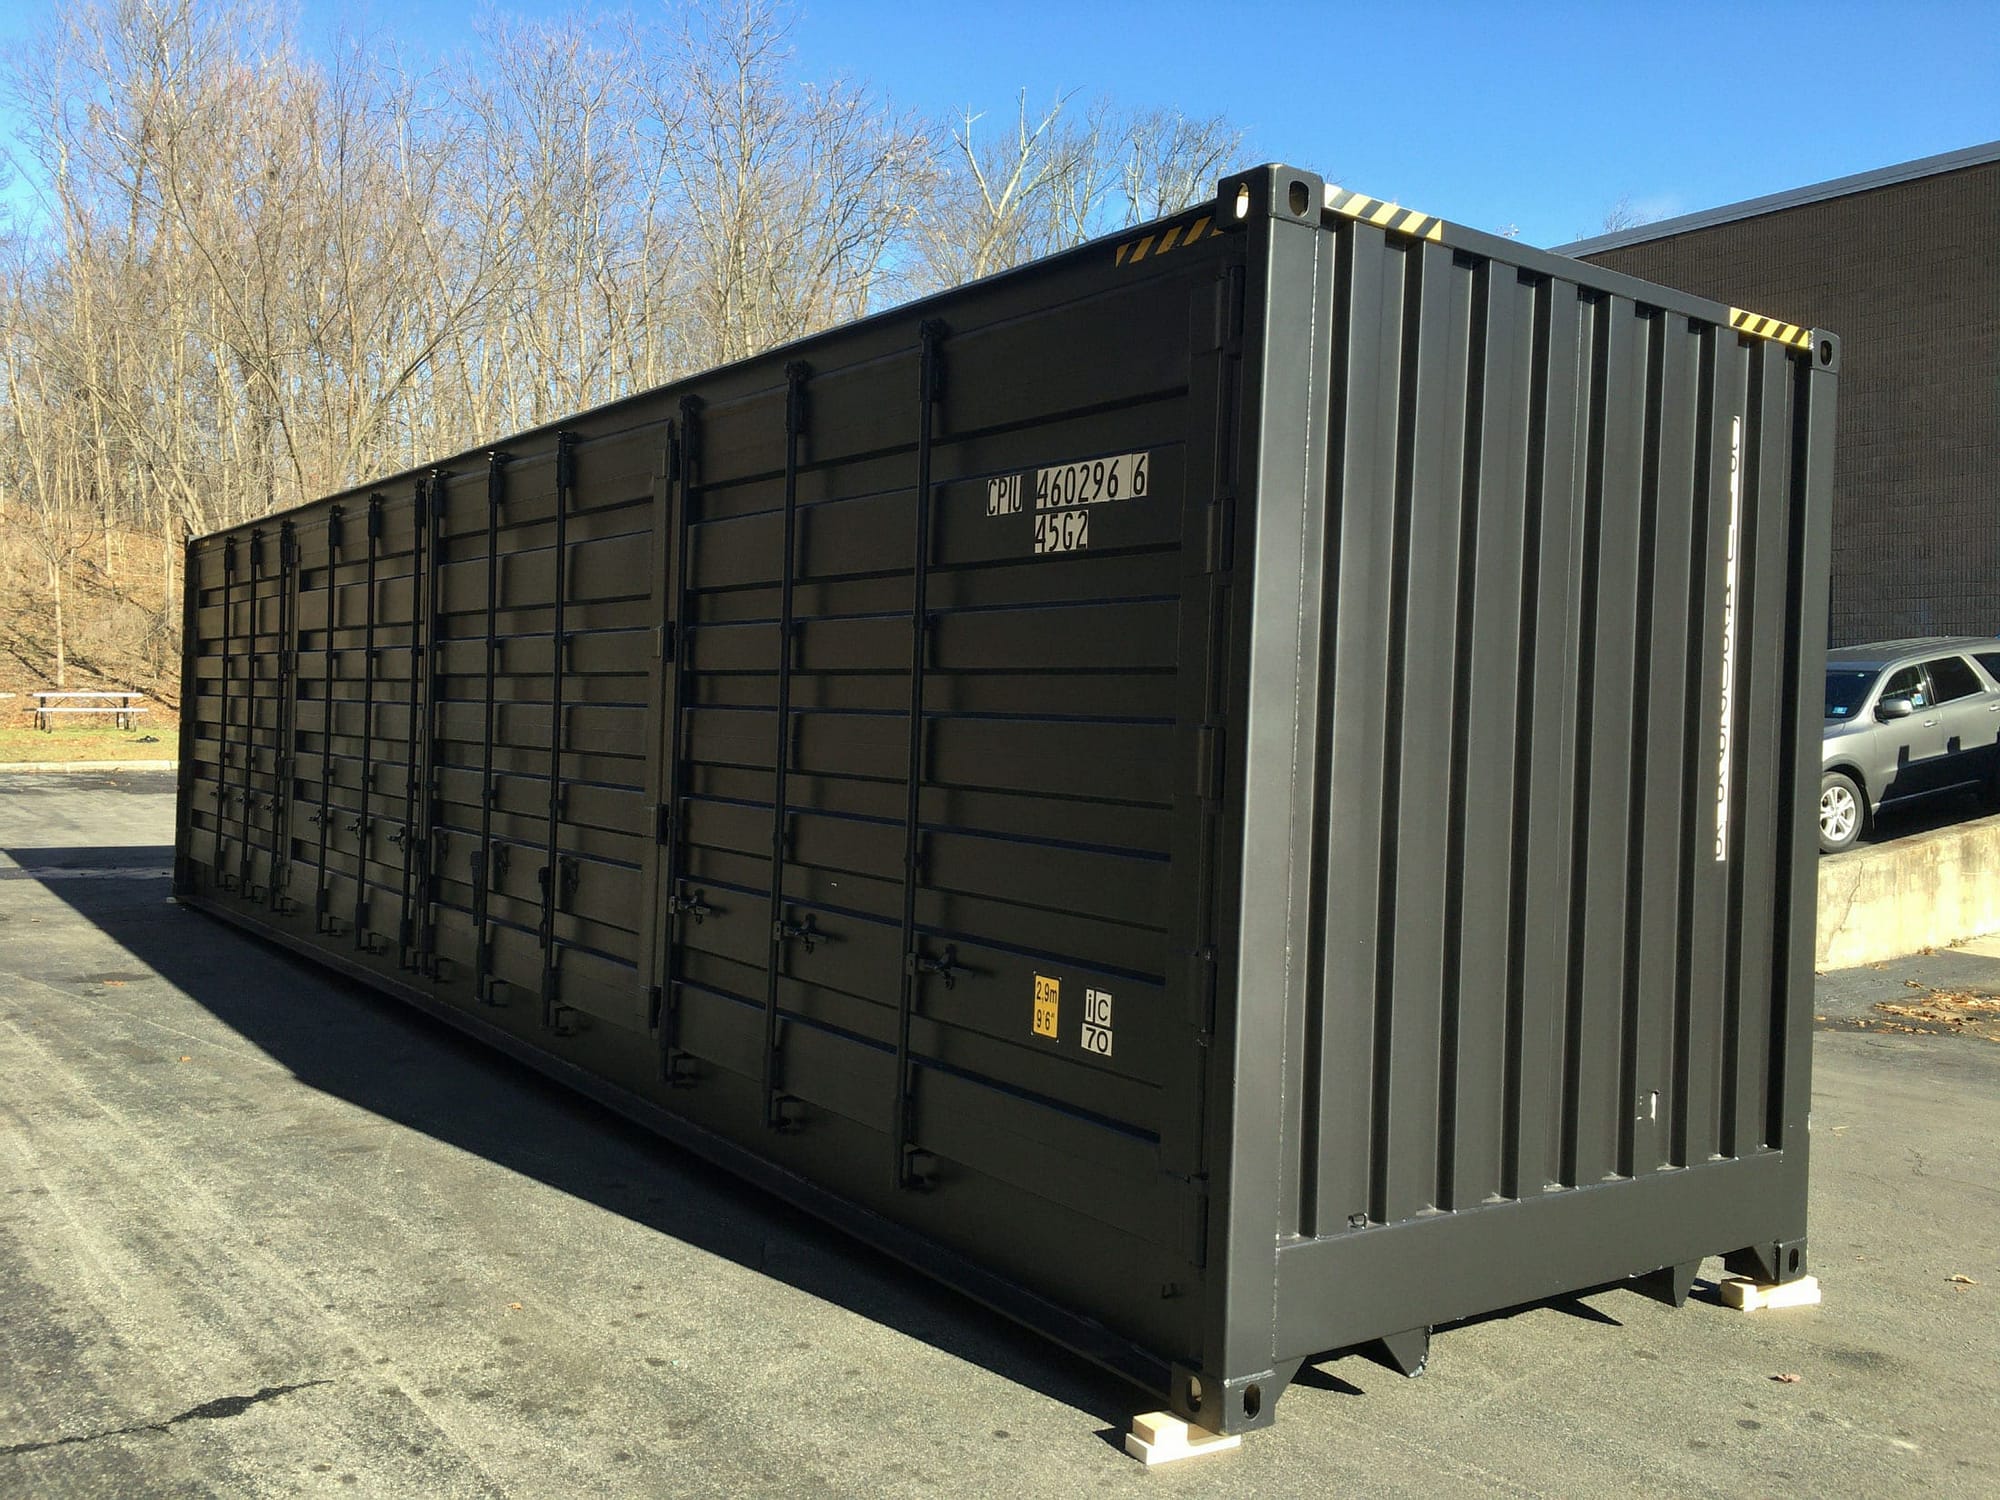 TRS Containers sells and modifies New 40 foot long highcubes for exhibit space and systems housing